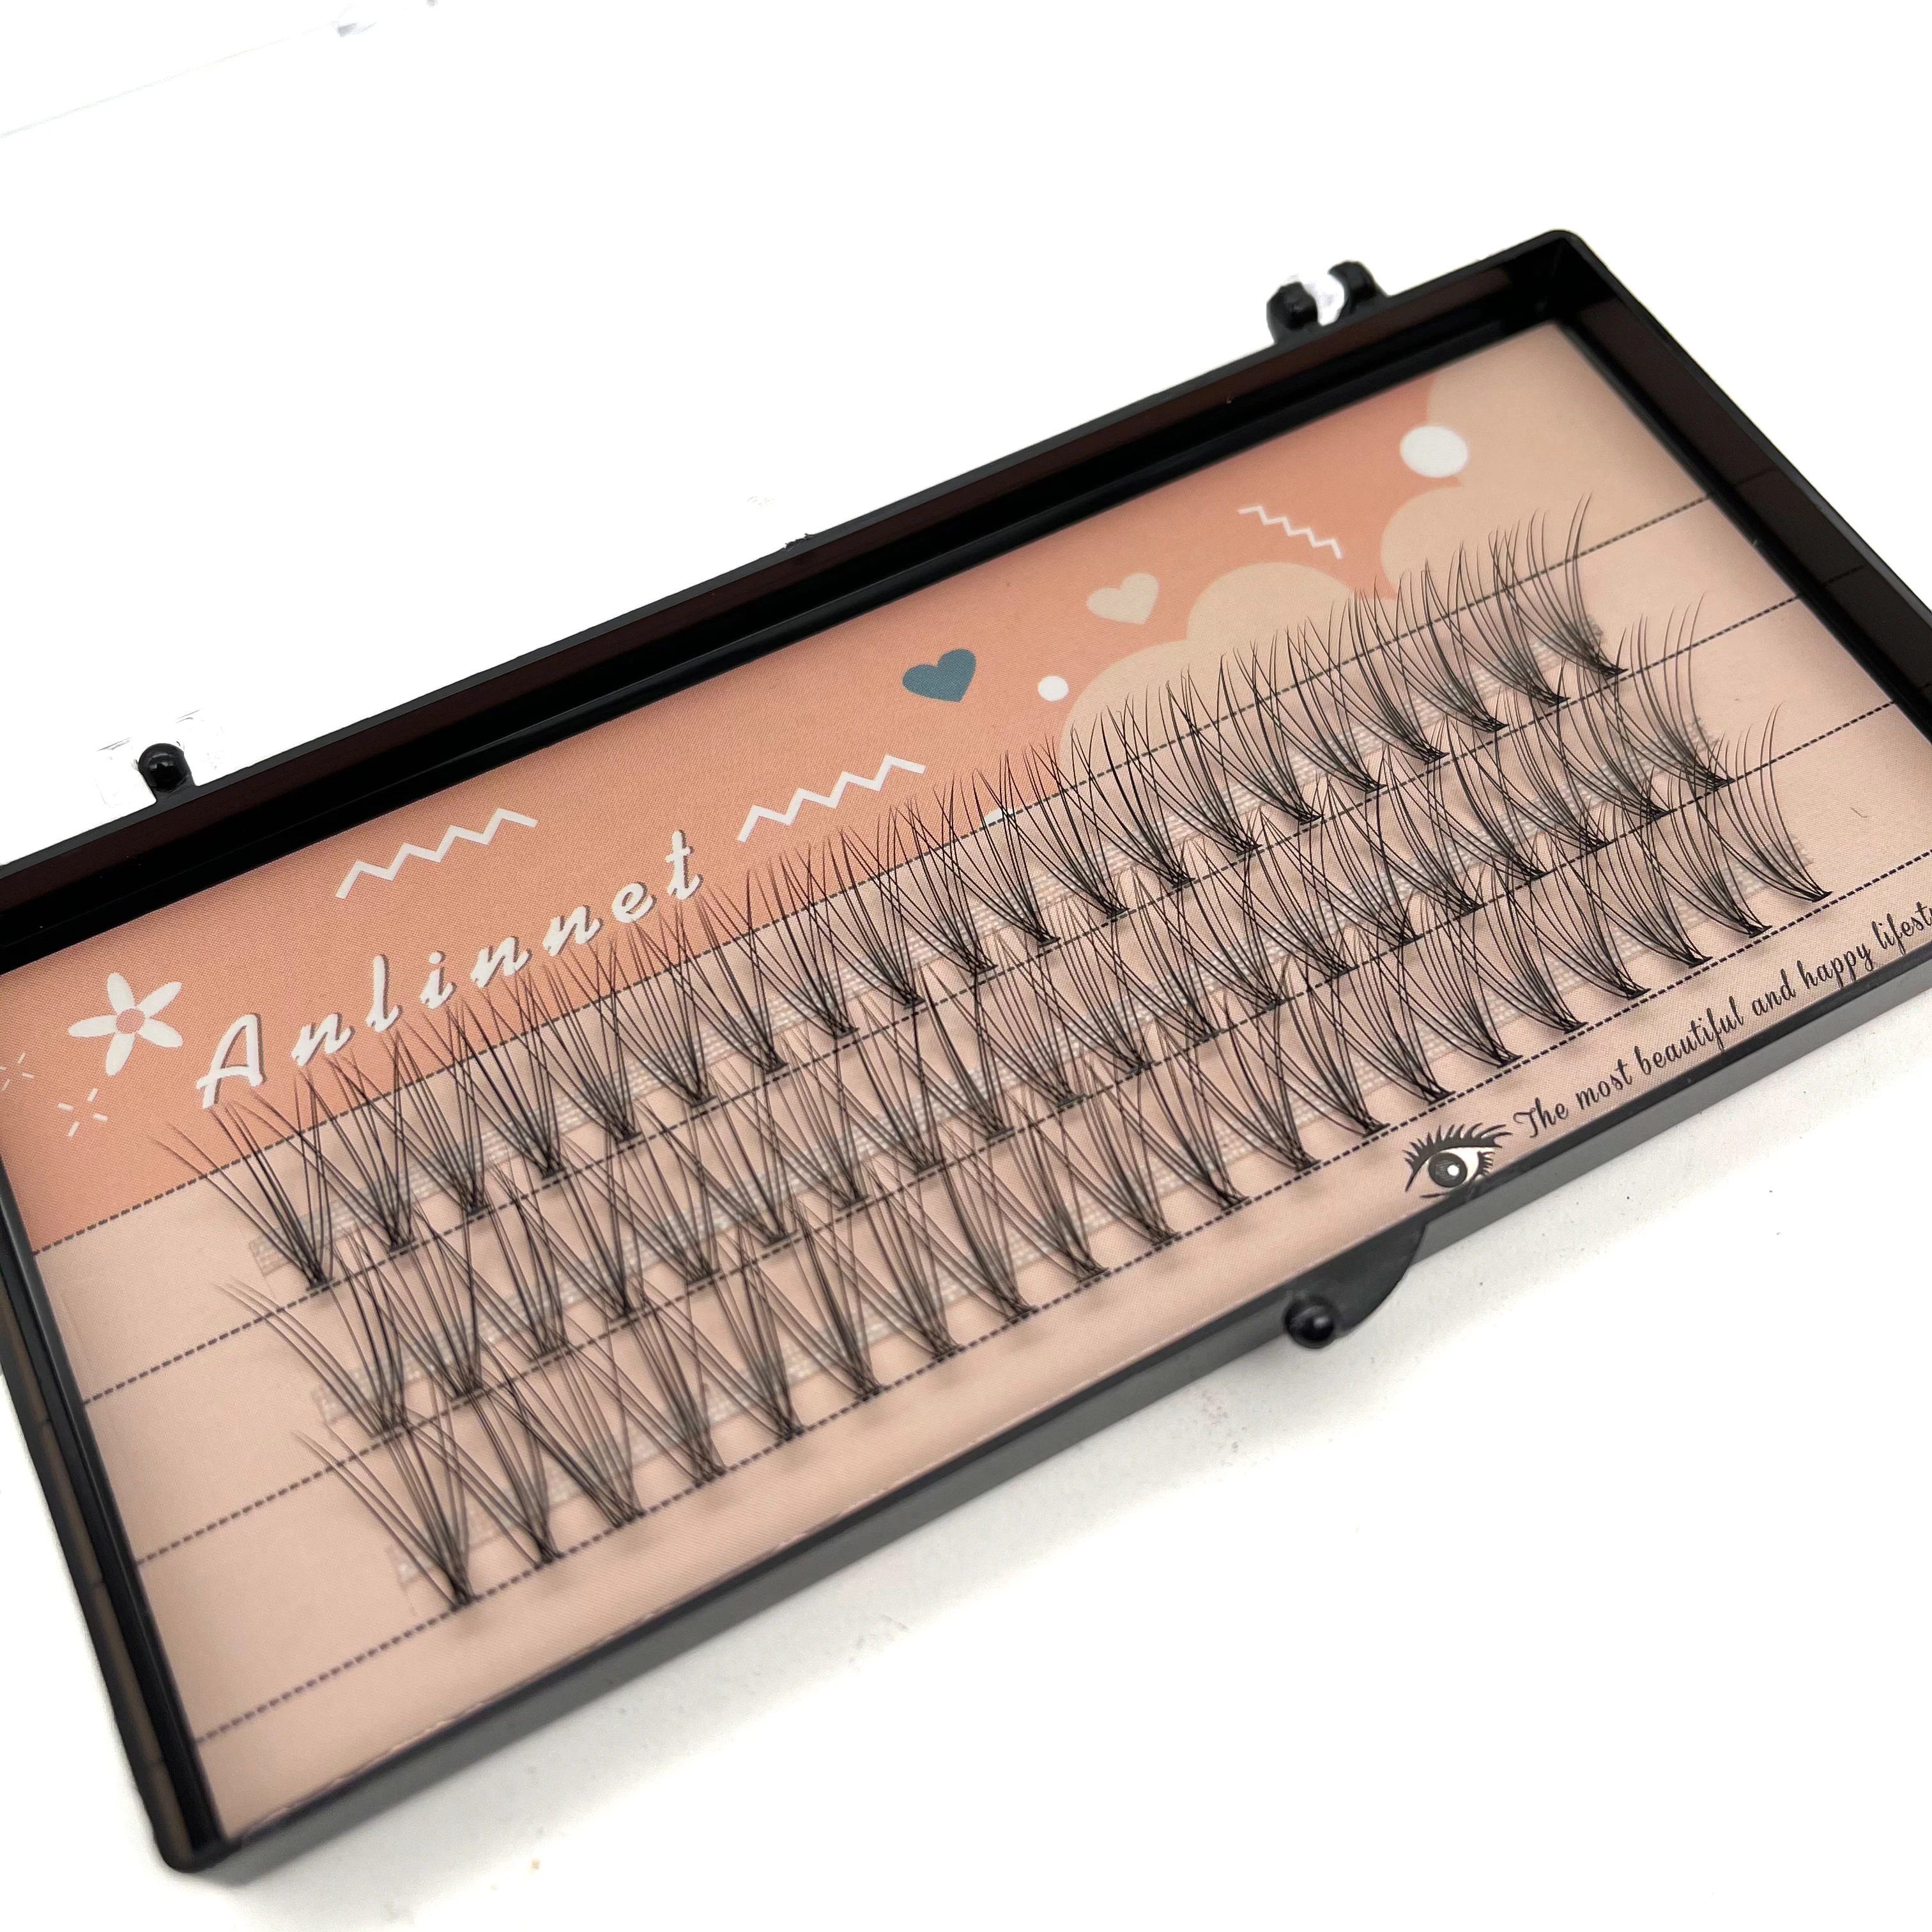 60 pieces of personal eyelash makeup grafted eyelashes 3D false eyelashes professional personal eyelashes free shipping 2